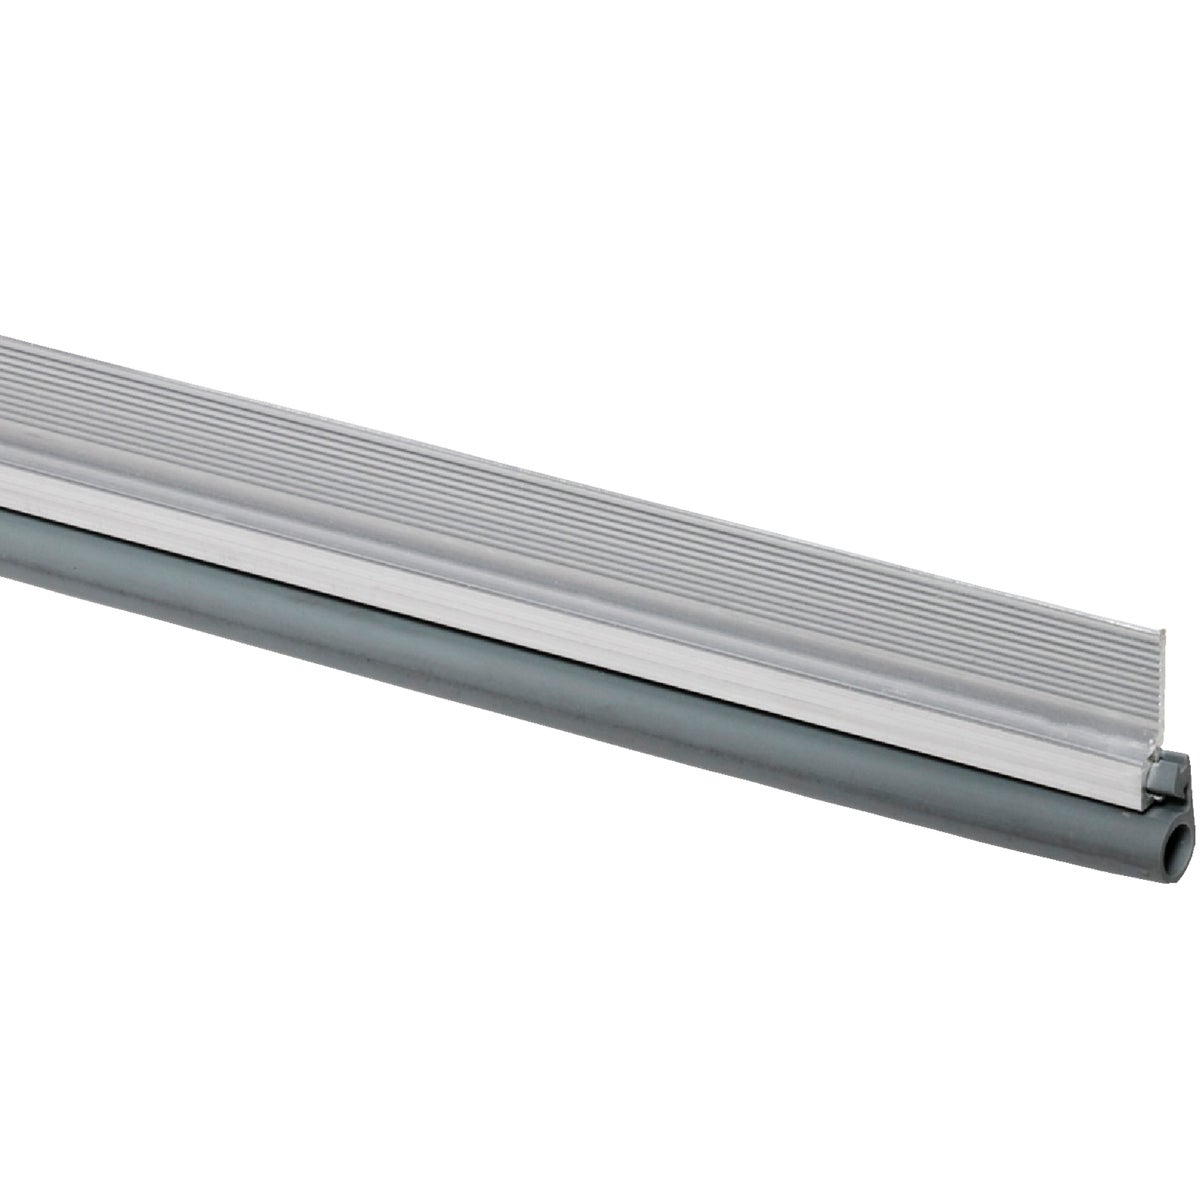 Item 260409, Cinch Door Jamb Seal works by creating an airtight seal around the top and 